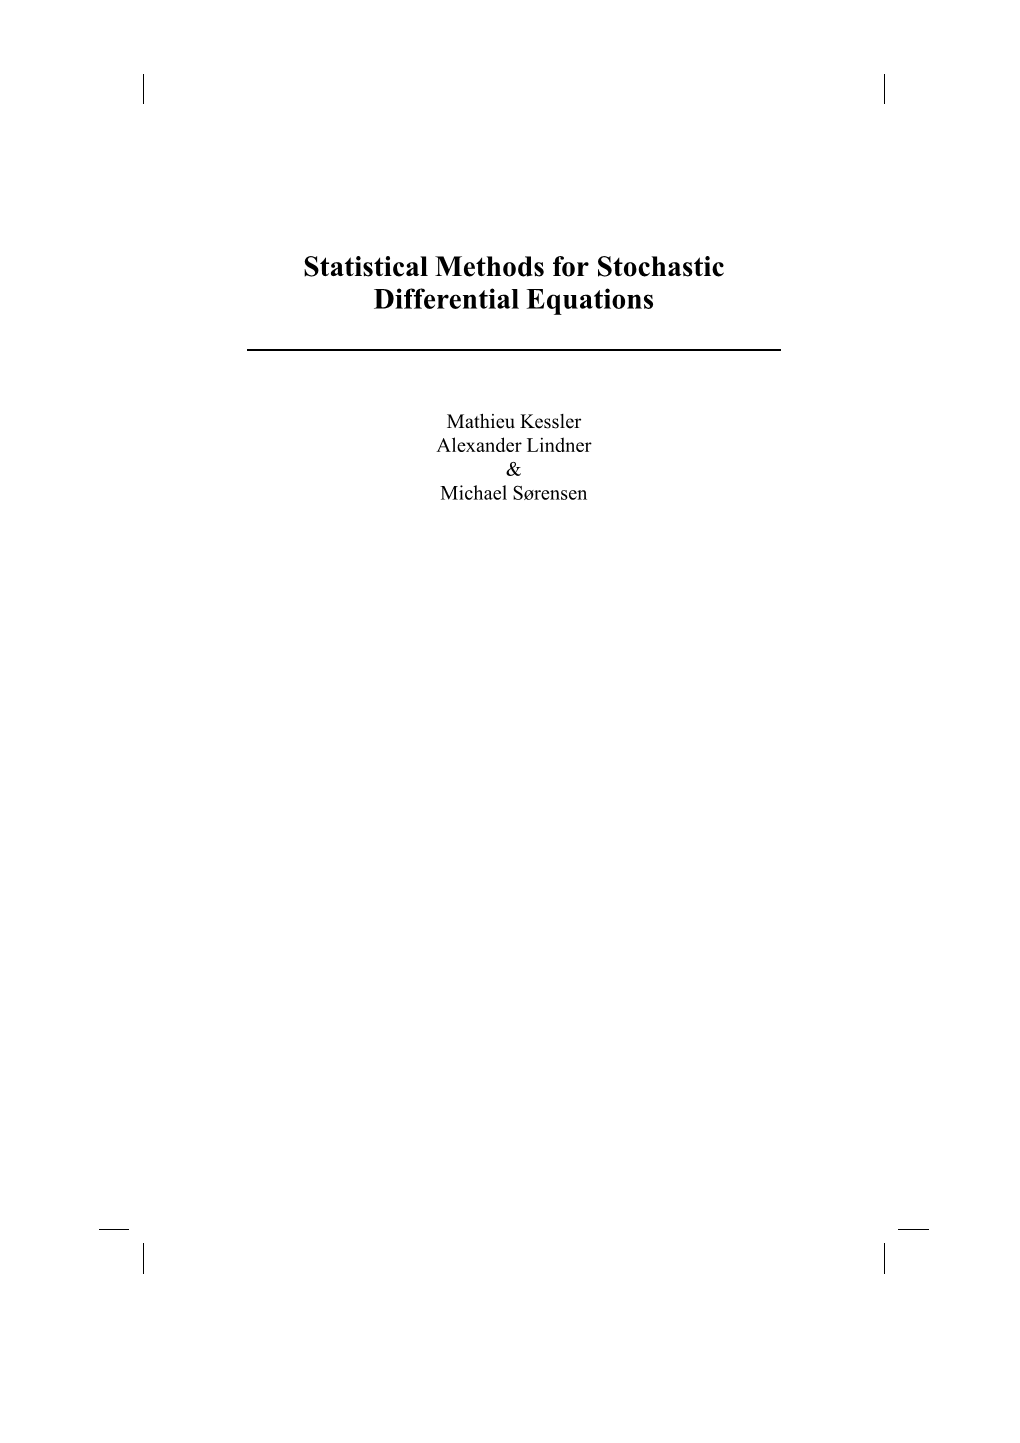 Statistical Methods for Stochastic Differential Equations